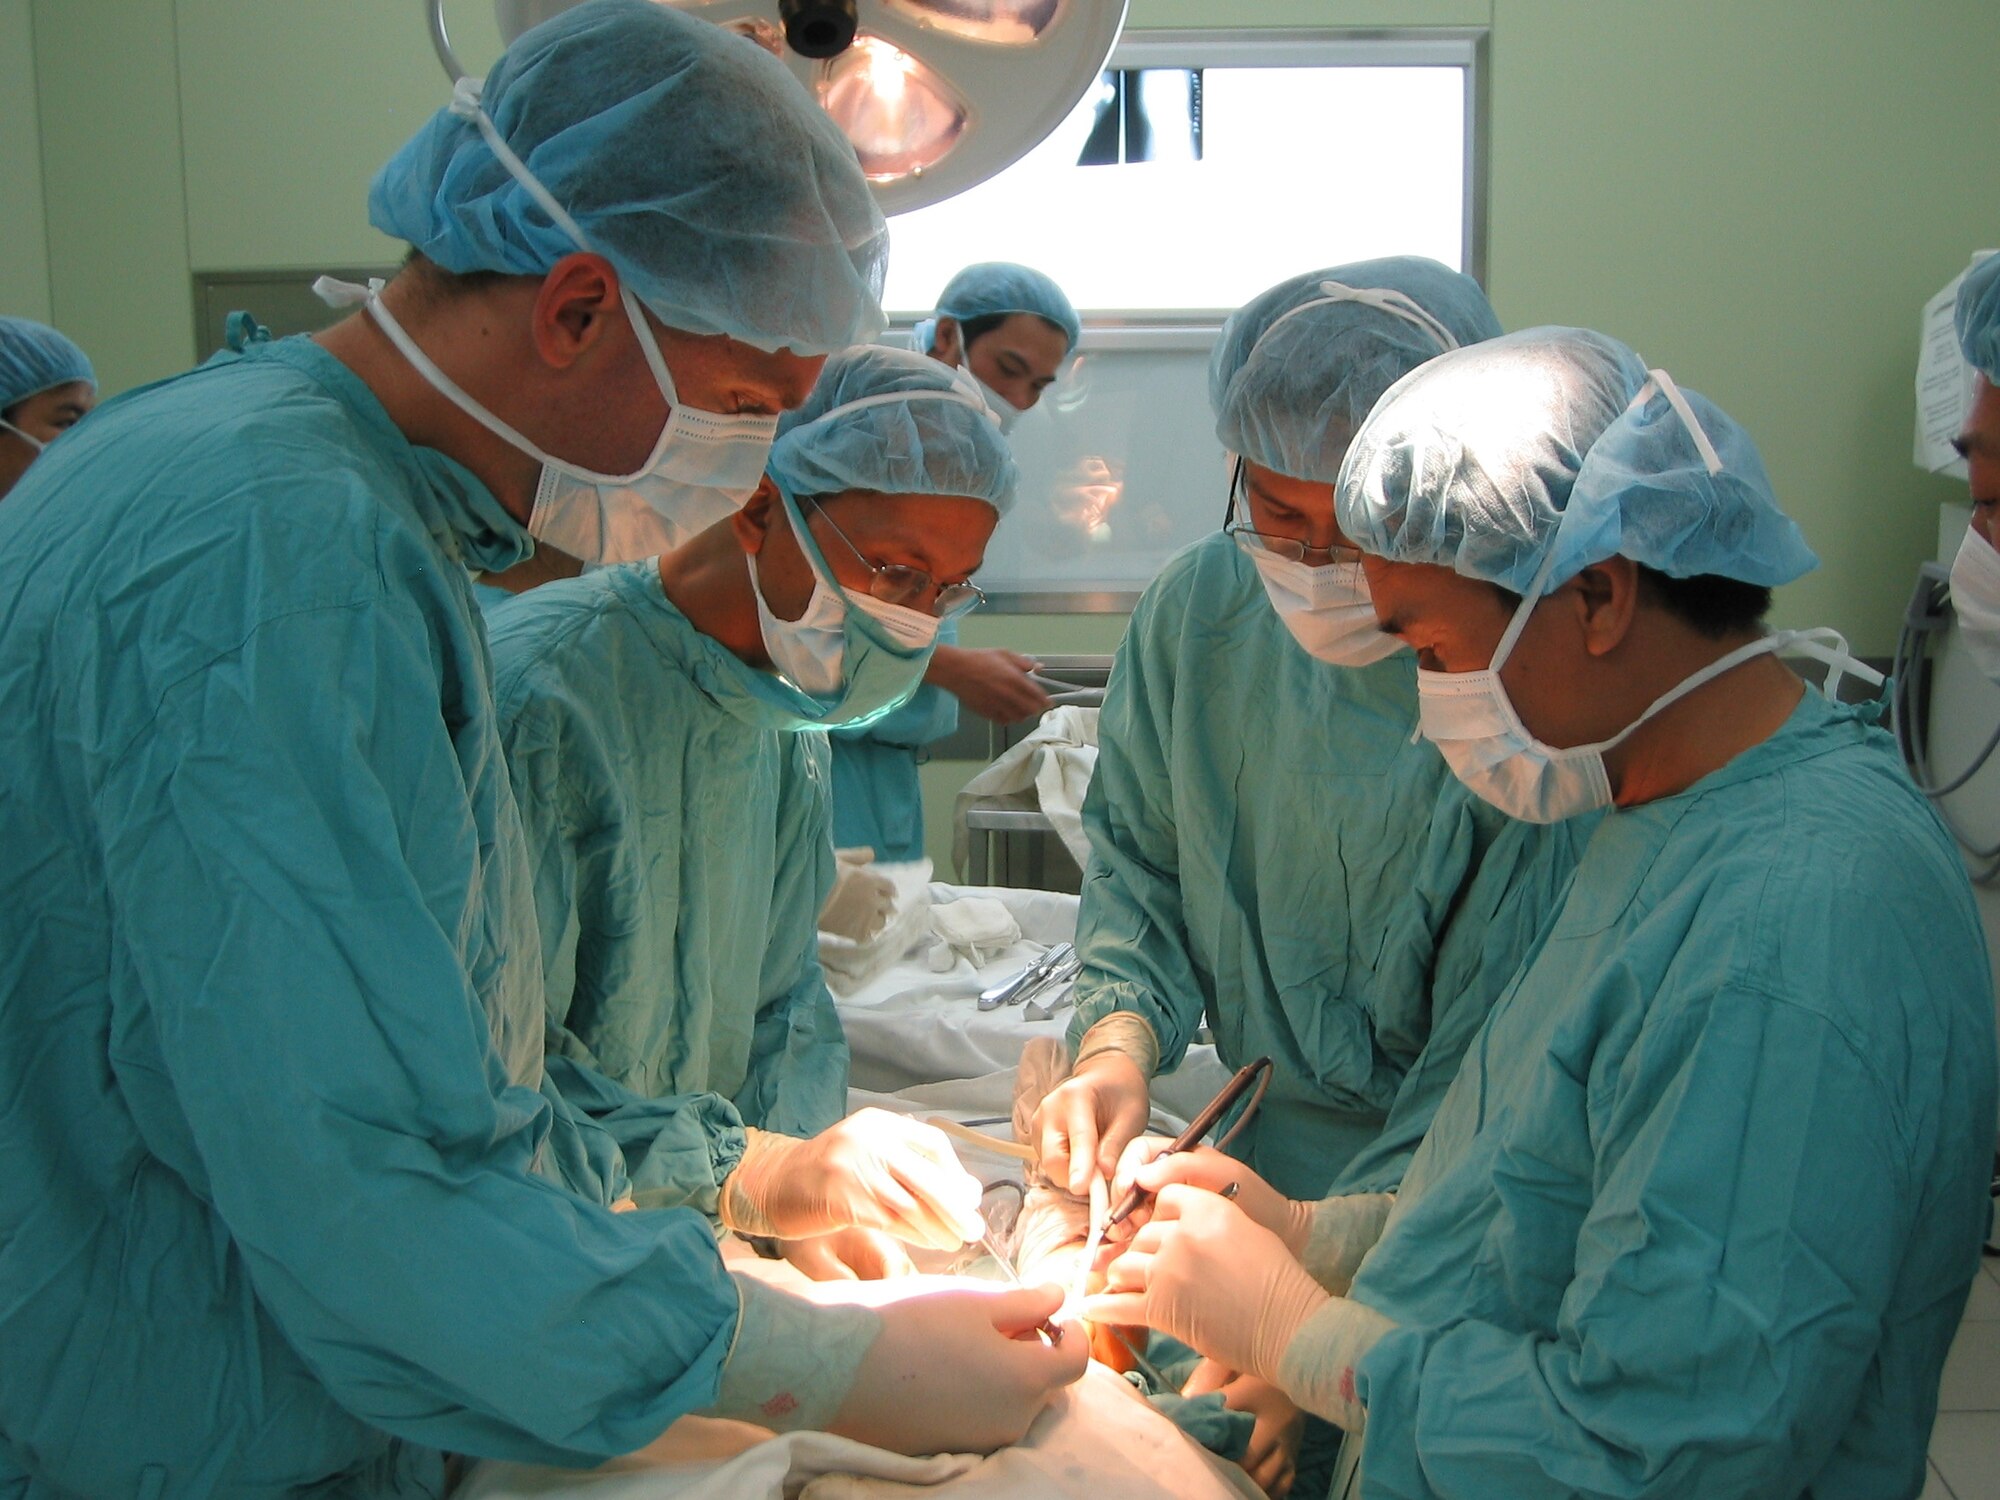 VIETNAM -- Dr. Joe Orchowski, Orthopedics surgeon at Tripler Army Medical Center, (far left)  performing knee replacement surgery with Hue Central Hospital medical staff. This humanitarian assistance effort was funded by US Pacific Command as a high priority Asia-Pacific Regional Initiative. It was planned and executed as a first-ever joint venture by US Army Pacific (USARPAC), Pacific Air Forces, 624 Regional Support Group, and two Non-Governmental Agencies: The East Meets West Foundation (EMWF) based in Vietnam and the AMM based in Hawaii.  (photo by Capt Fritz Craft)